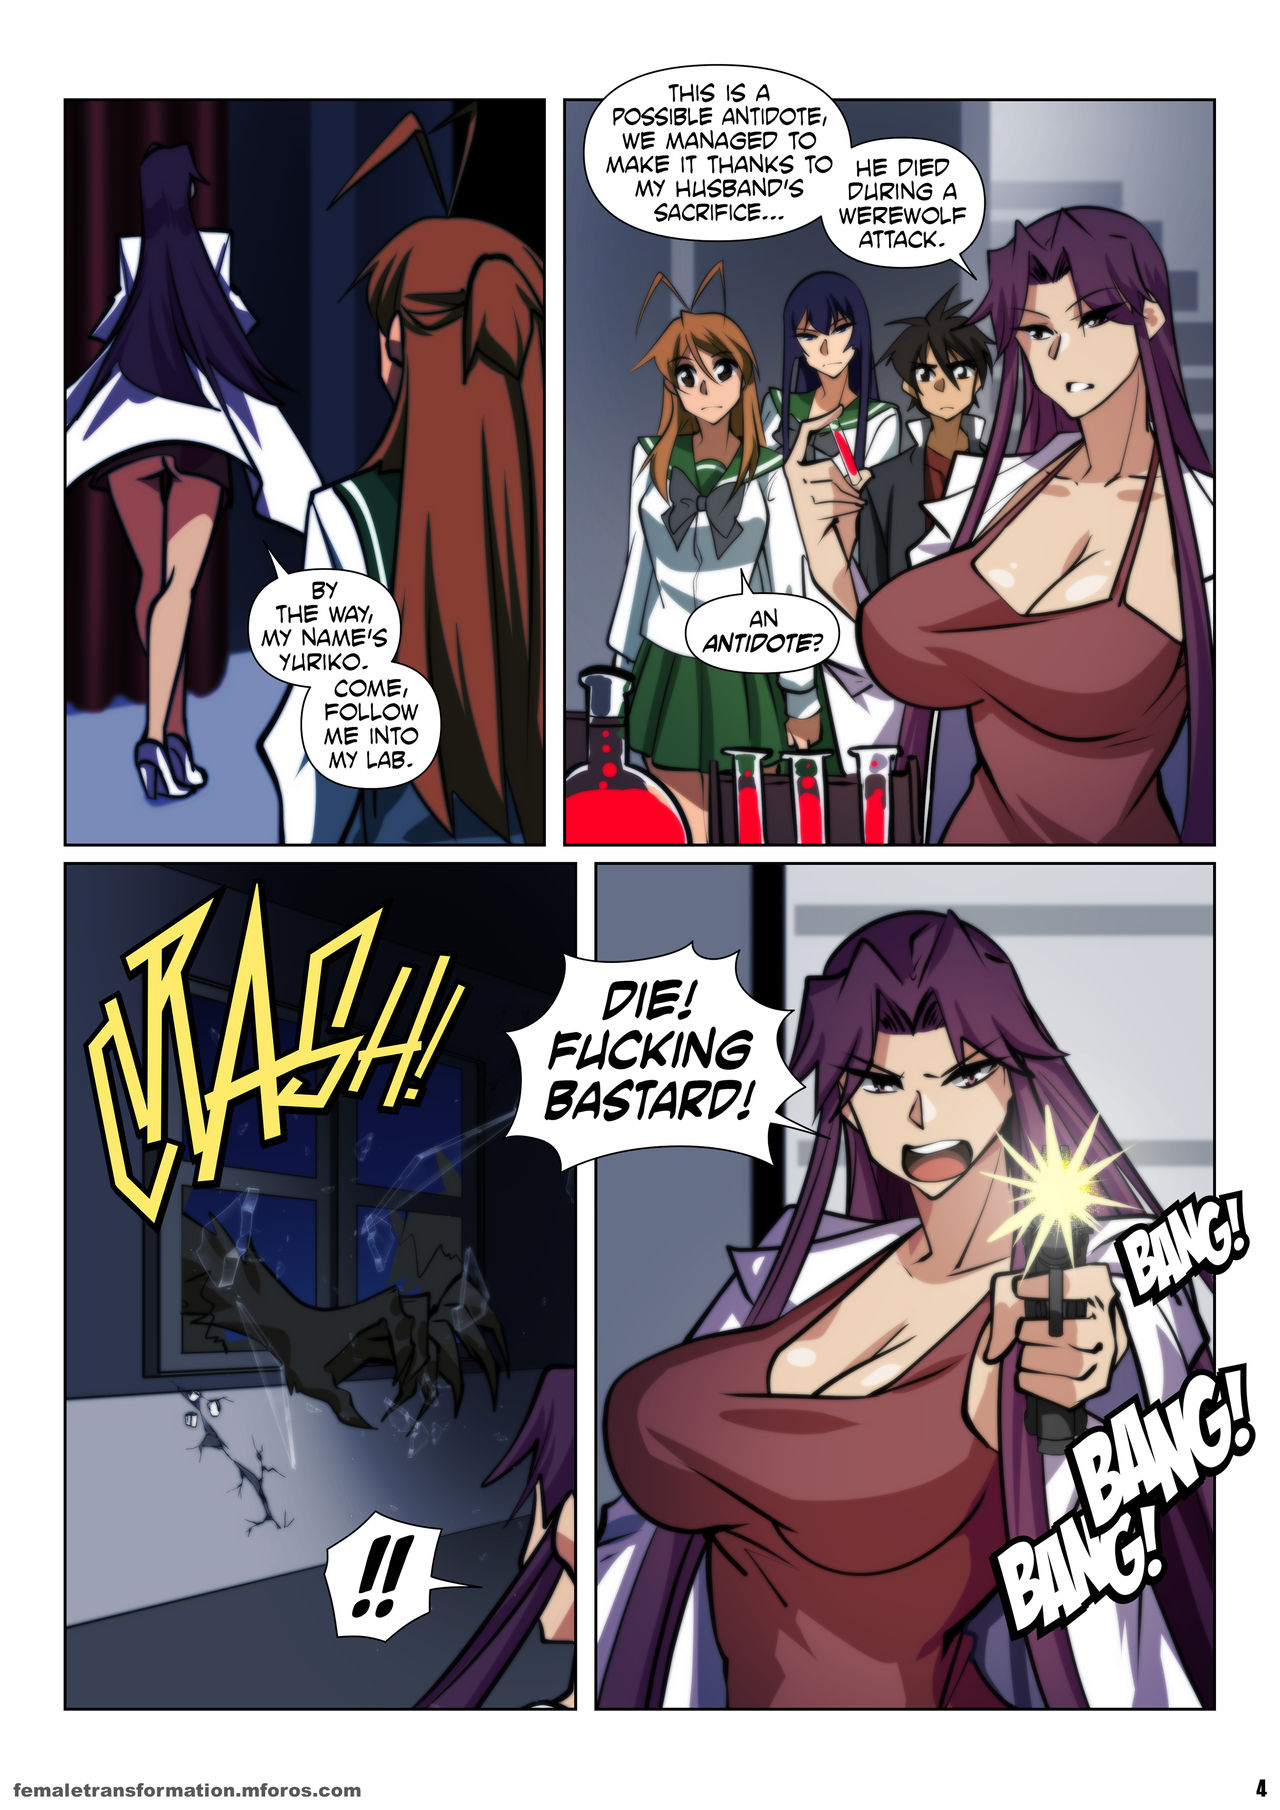 H.O.T.W. High School of the Werewolf - Page 5 - IMHentai